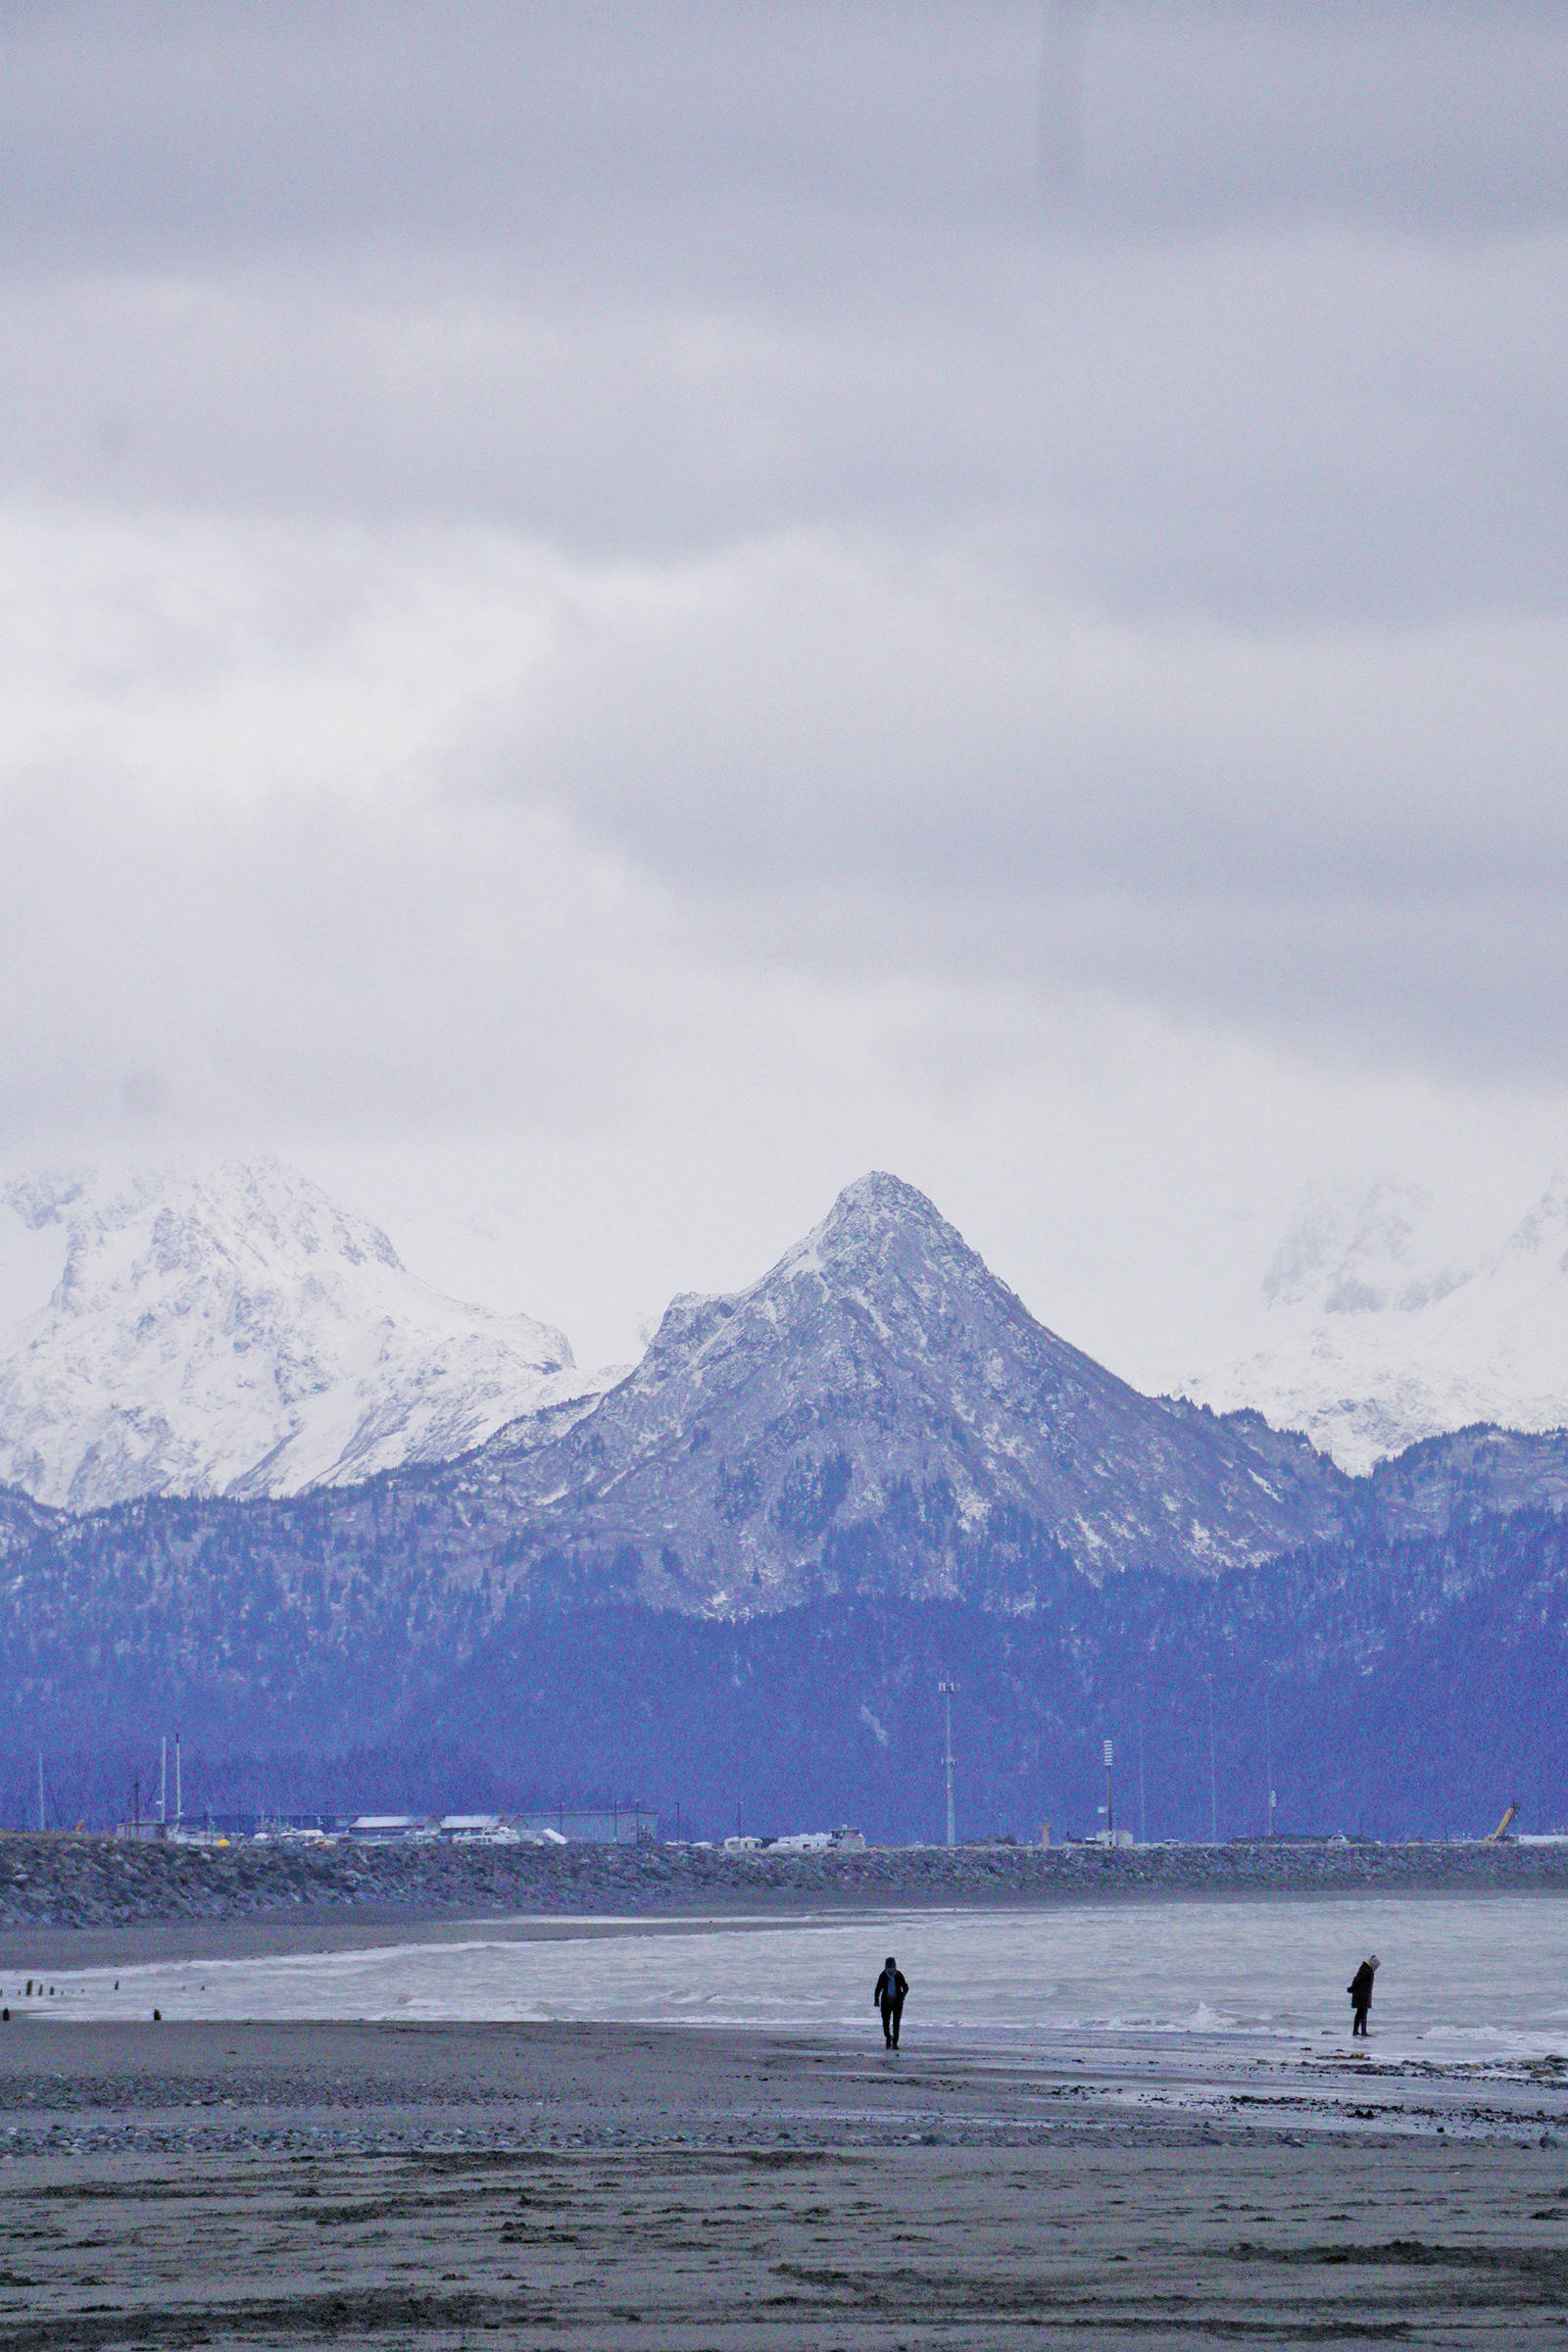 Recent snow in the Kenai Mountains across Kachemak Bay has made the Poot Peak panda more visible, as seen here on Nov. 18, 2019, in Homer, Alaska. (Photo by Michael Armstrong/Homer News)